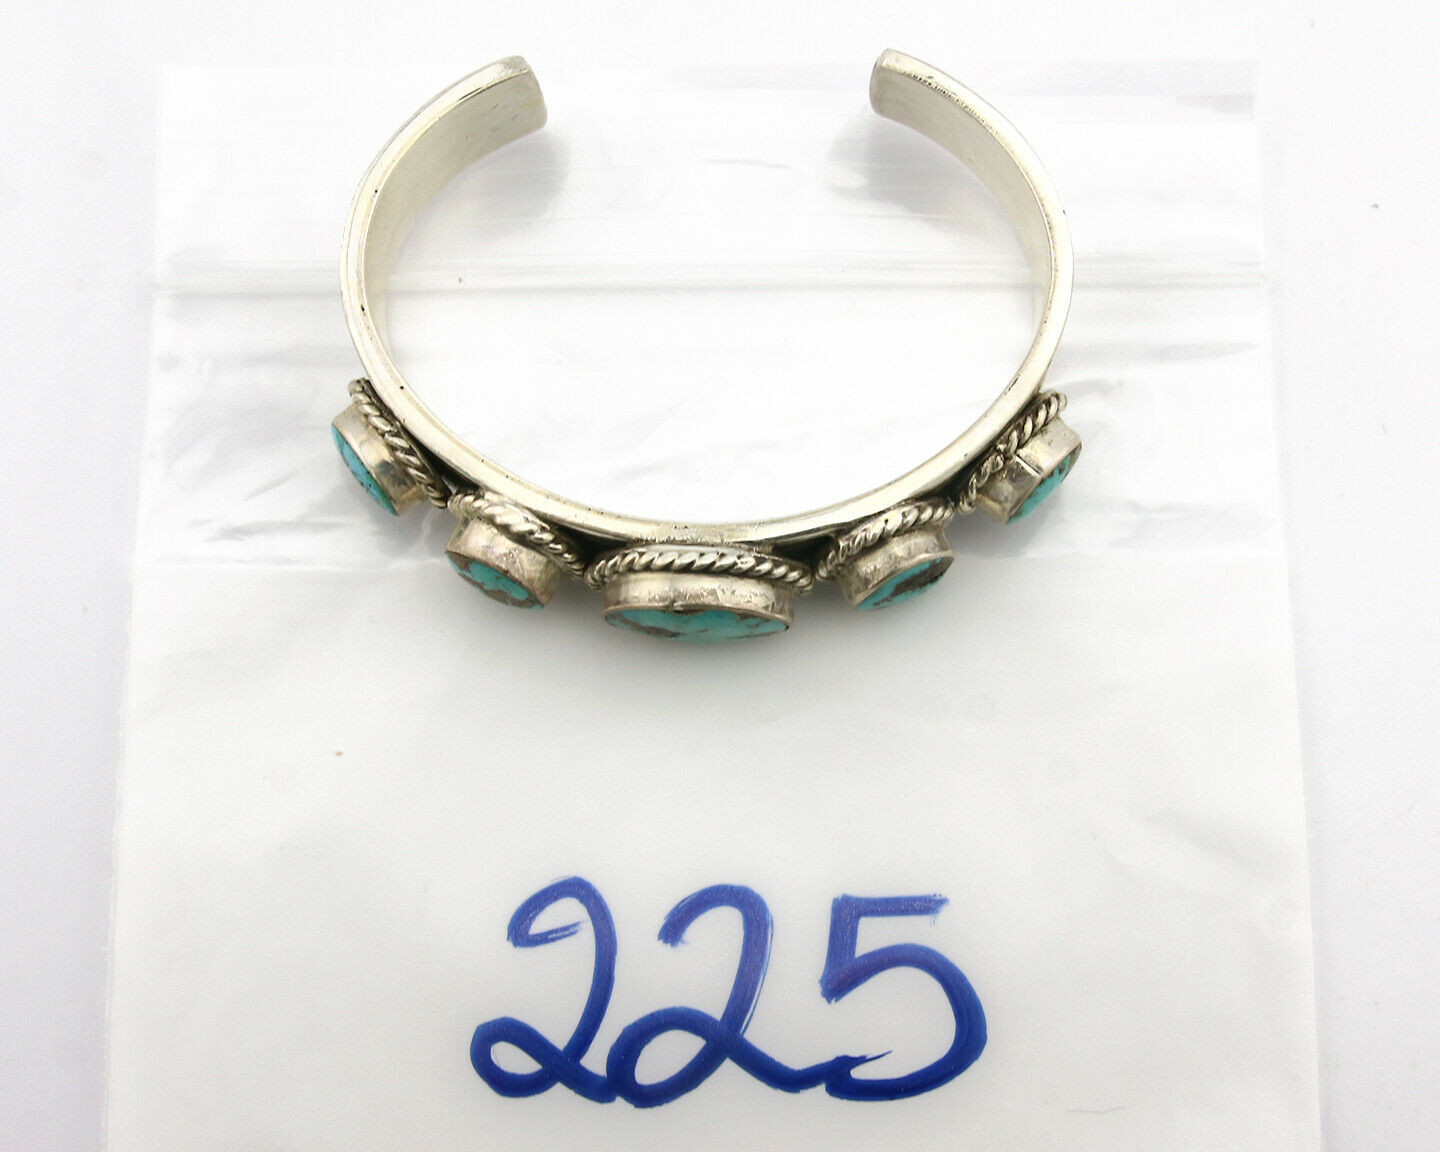 Navajo Bracelet .925 Silver Morenci Turquoise Cuff Artist Signed PC C.80's